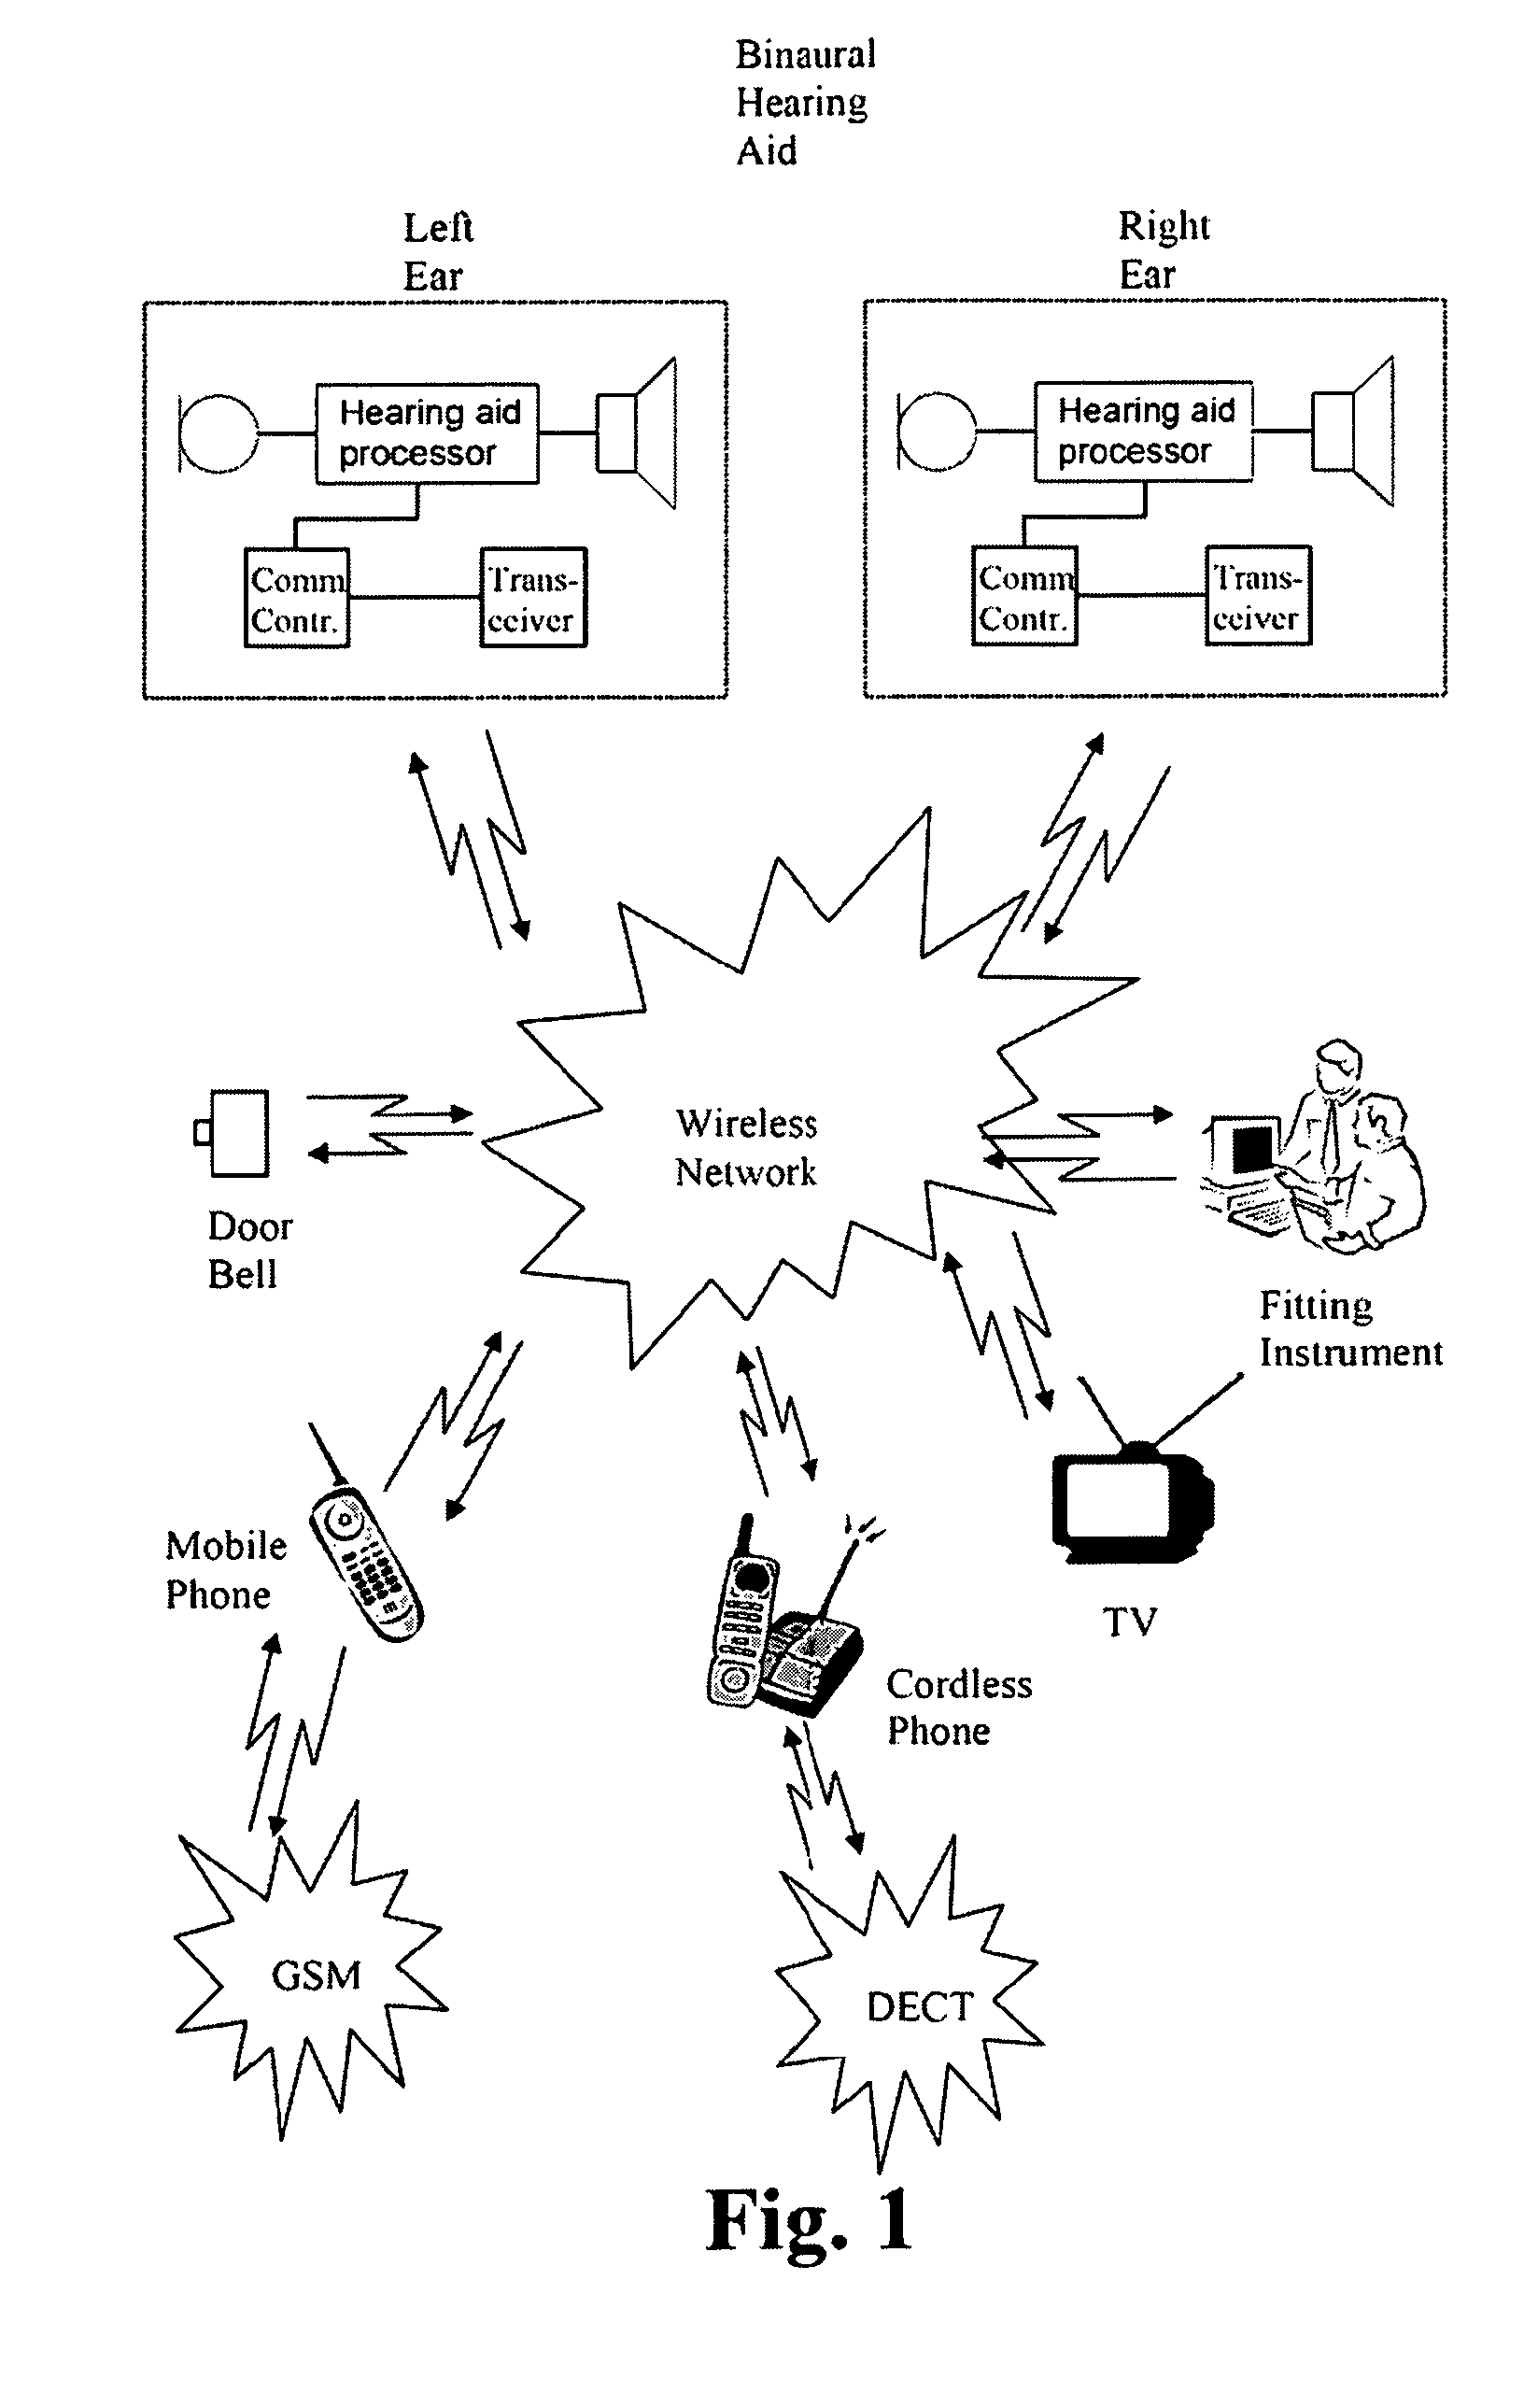 Hearing aid with adaptive data reception timing